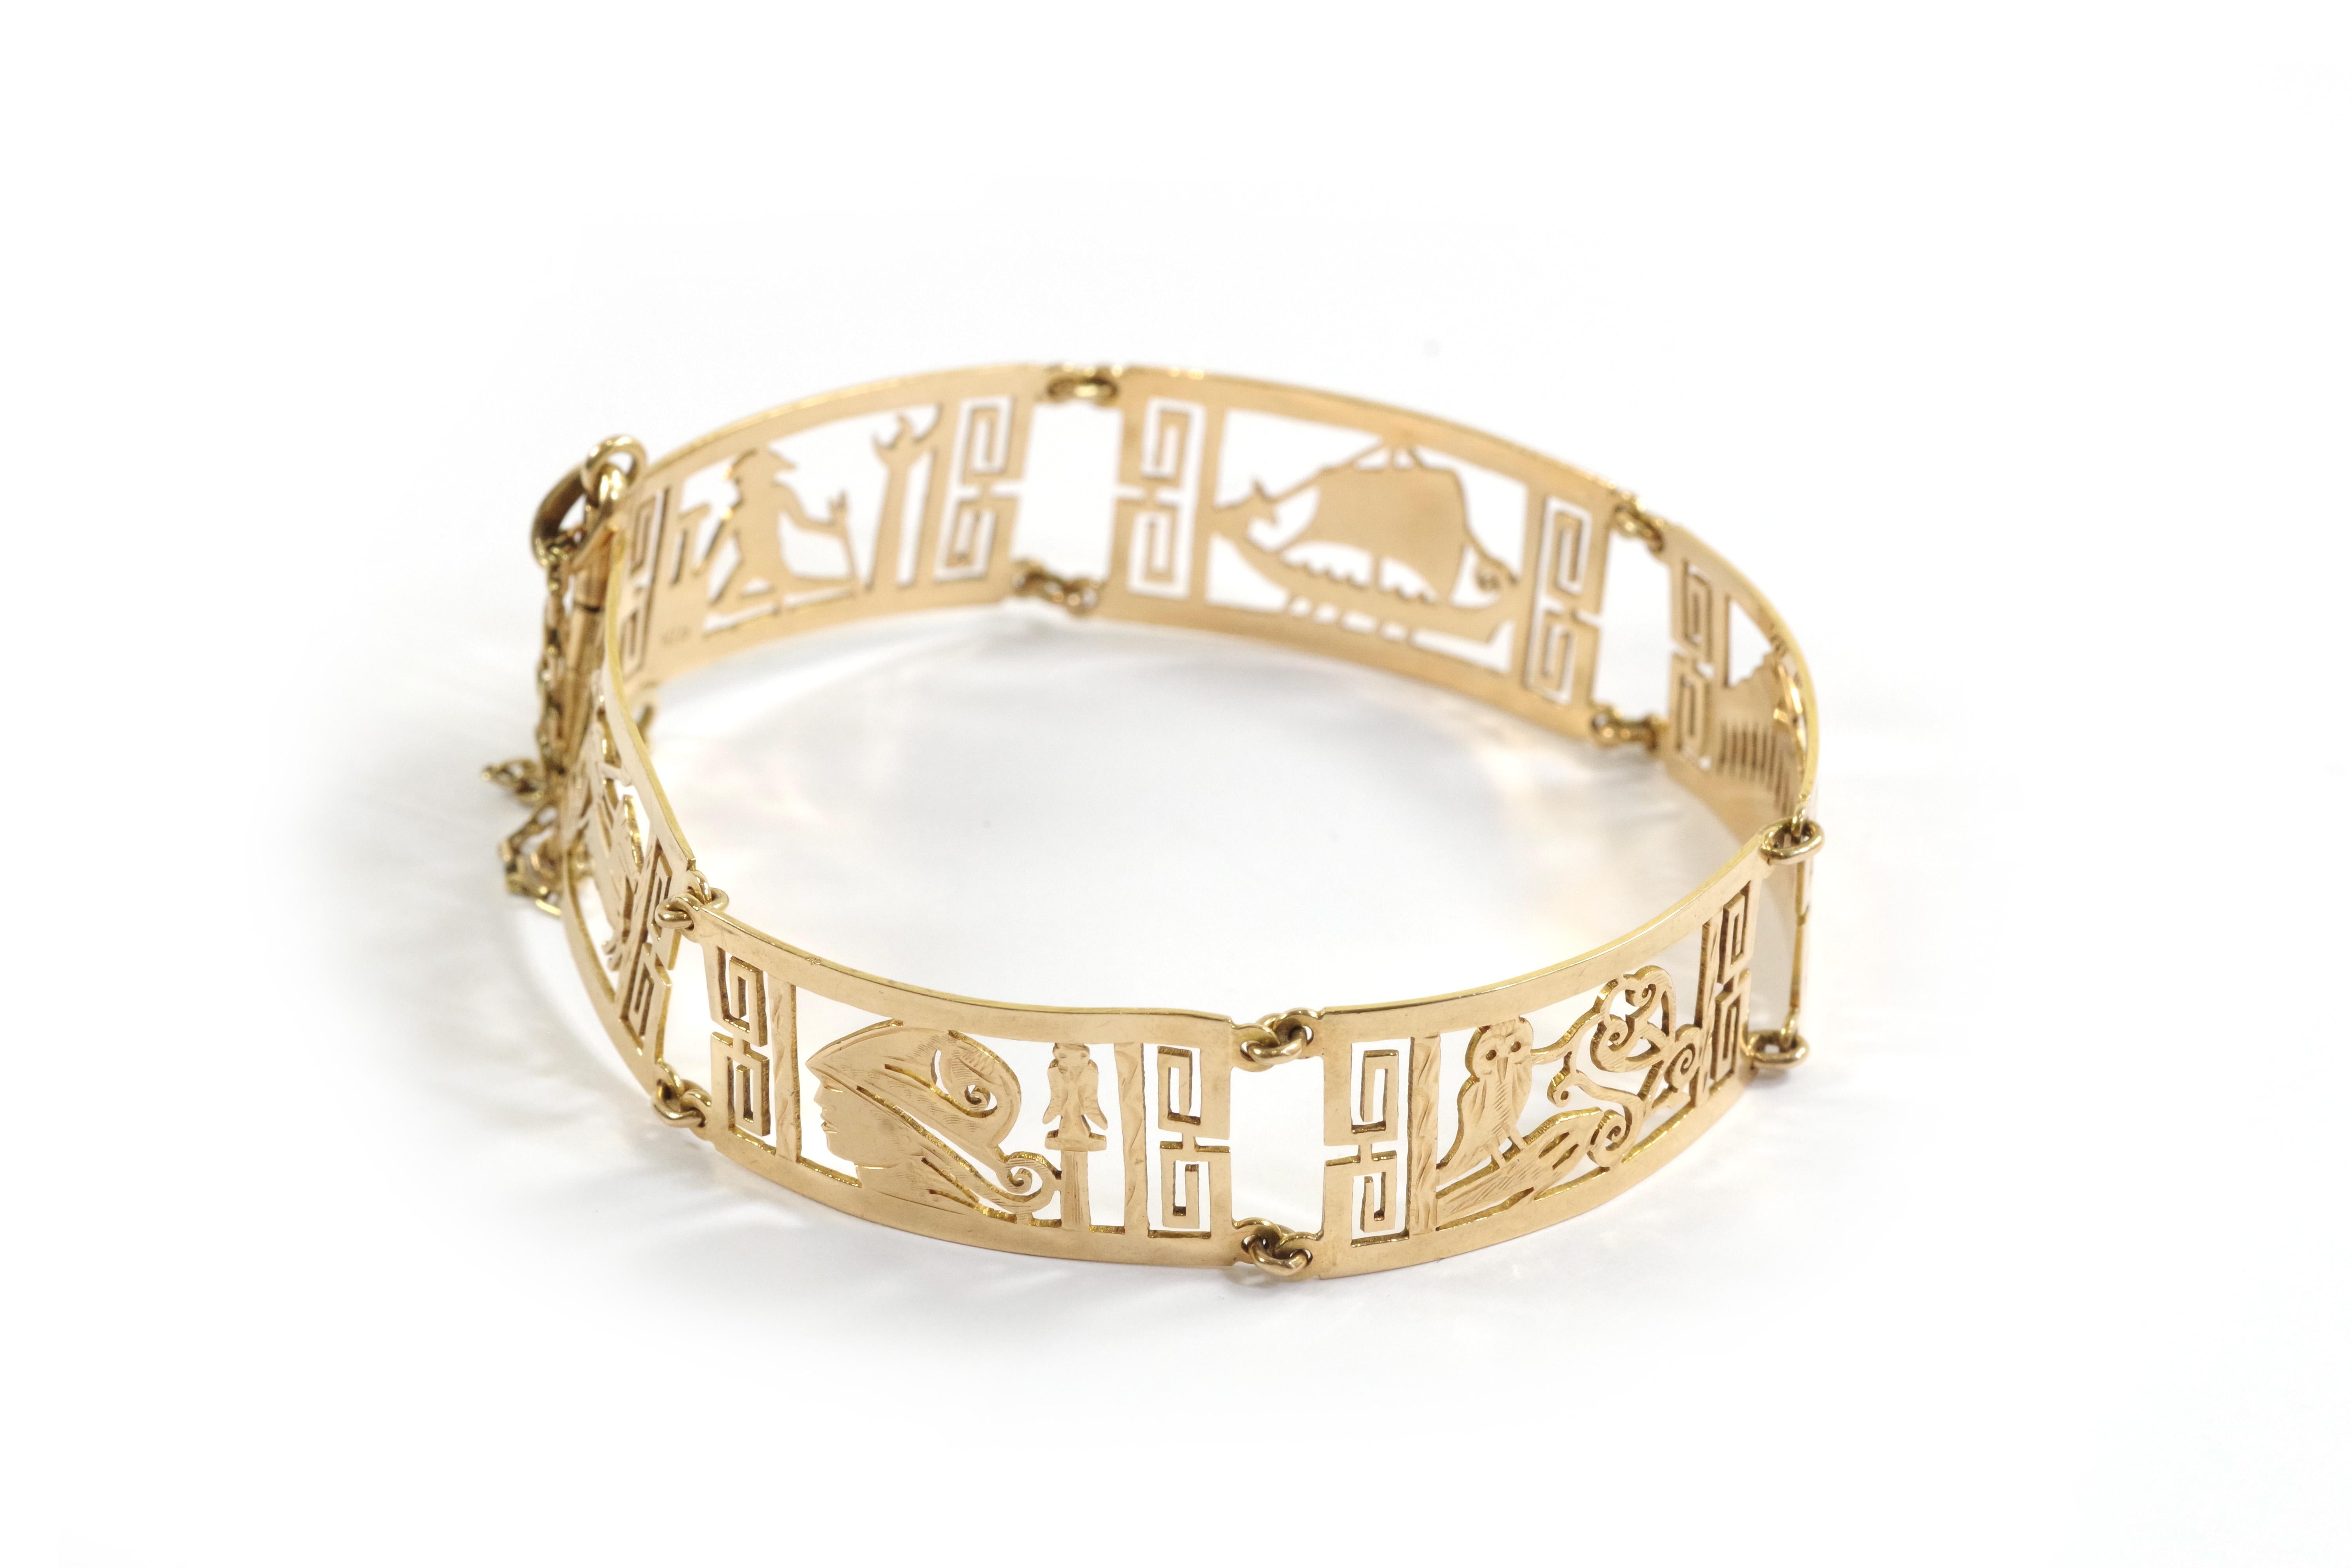 Greek style bracelet in 18 karat gold. Bracelet with large rigid links and openwork decorations evoking Greece. The rectangular links feature Athena, Hermes, the Parthenon, the Athens owl, a Roman trier (boat) and a horse-drawn chariot race. Vintage